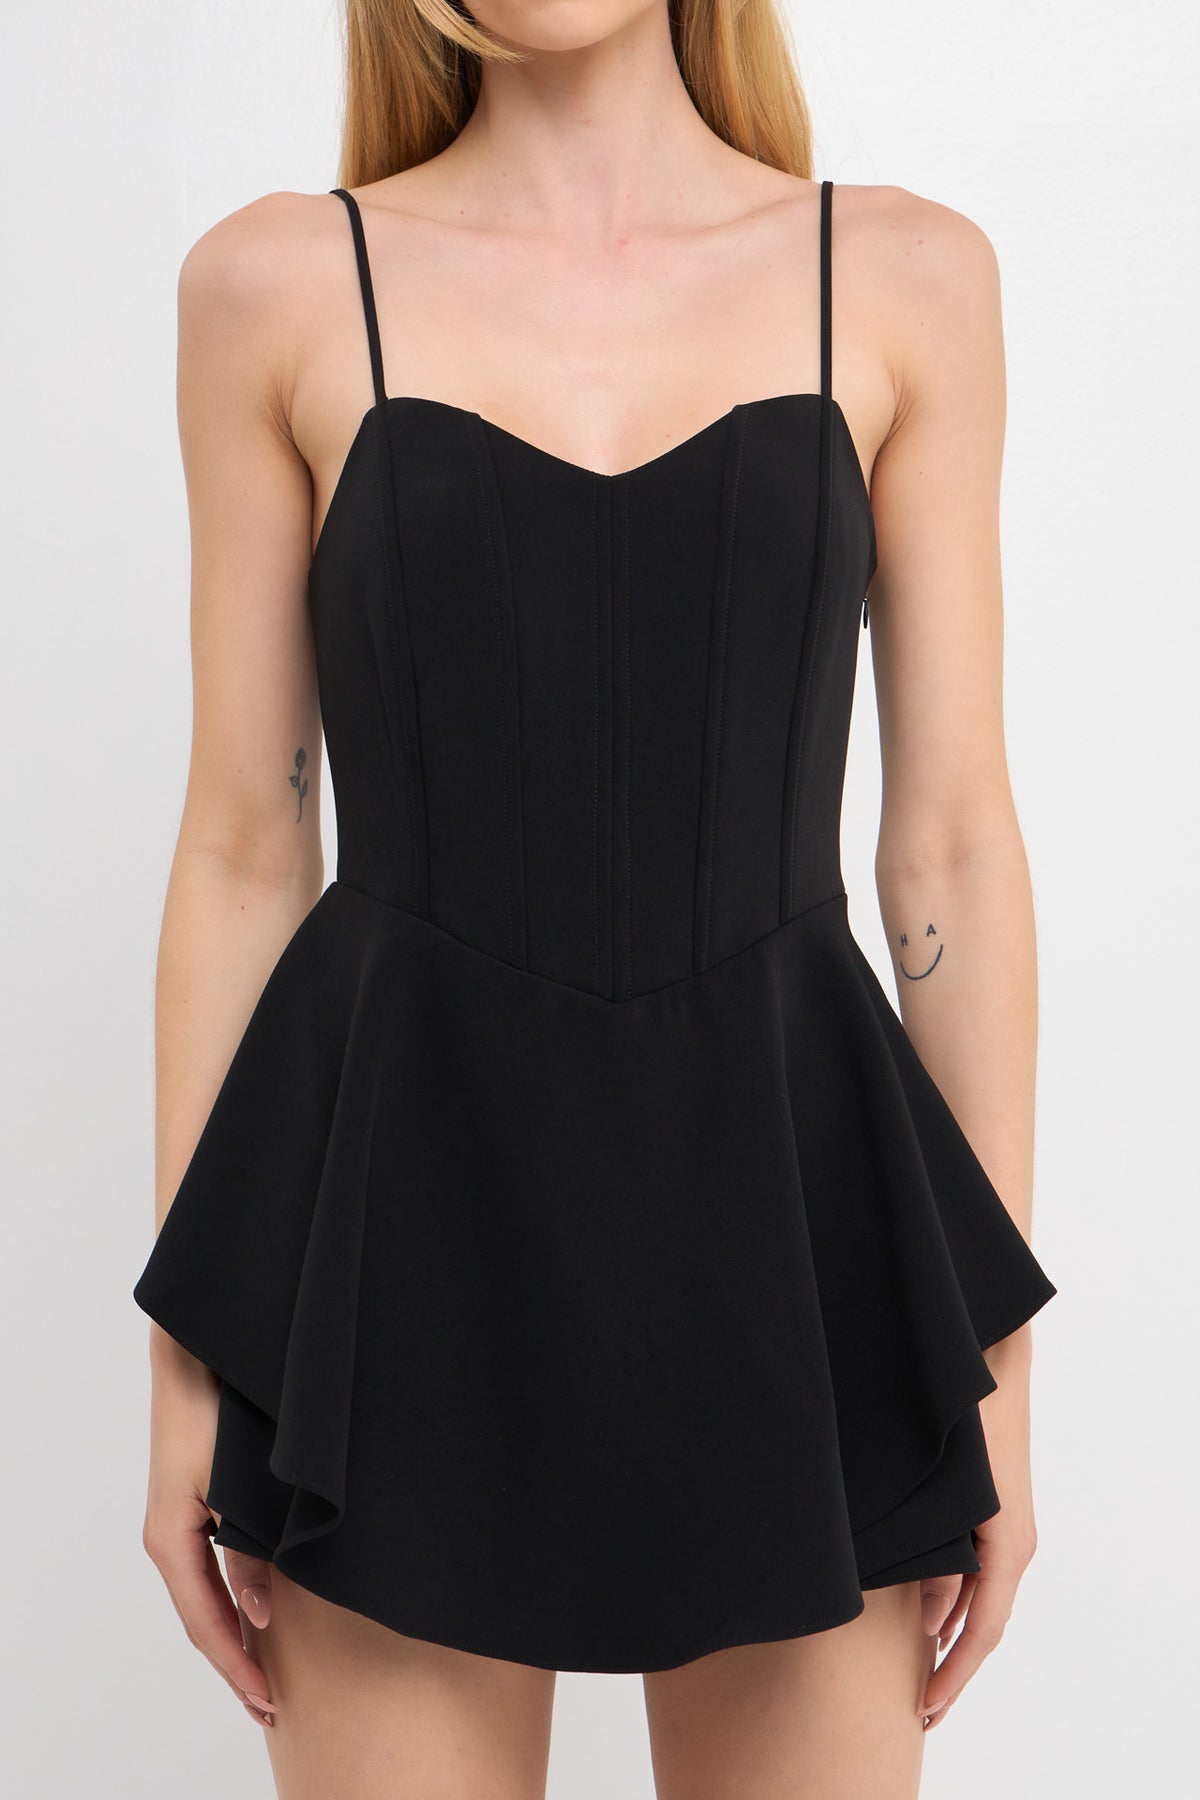 ENDLESS ROSE - Corset Bustier Ruffled Romper - ROMPERS available at Objectrare